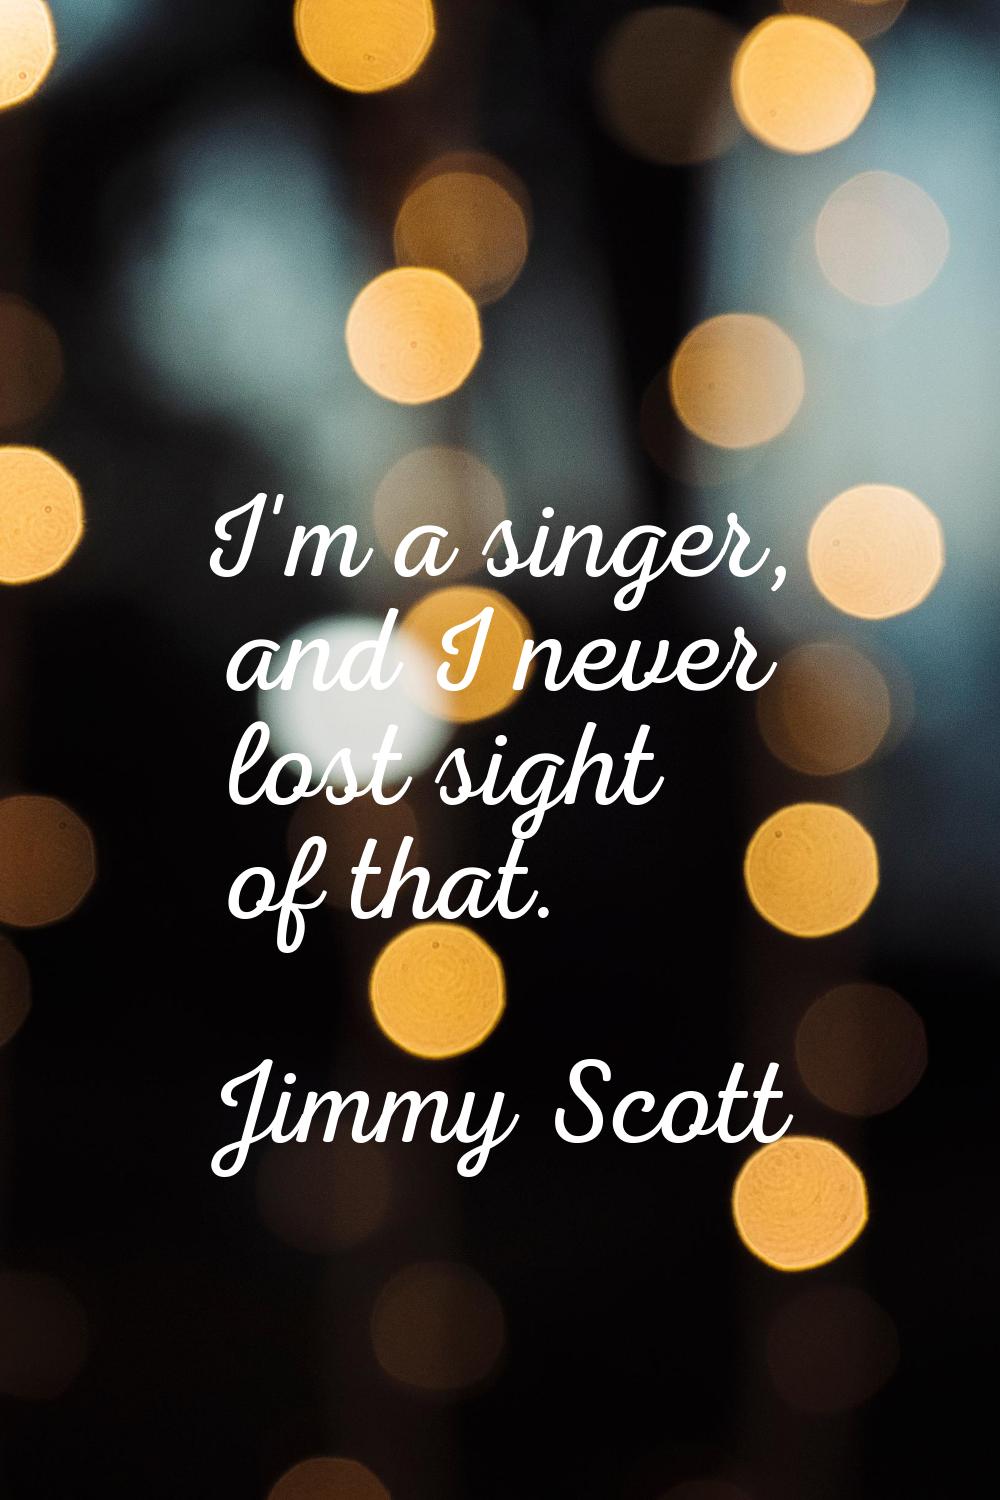 I'm a singer, and I never lost sight of that.